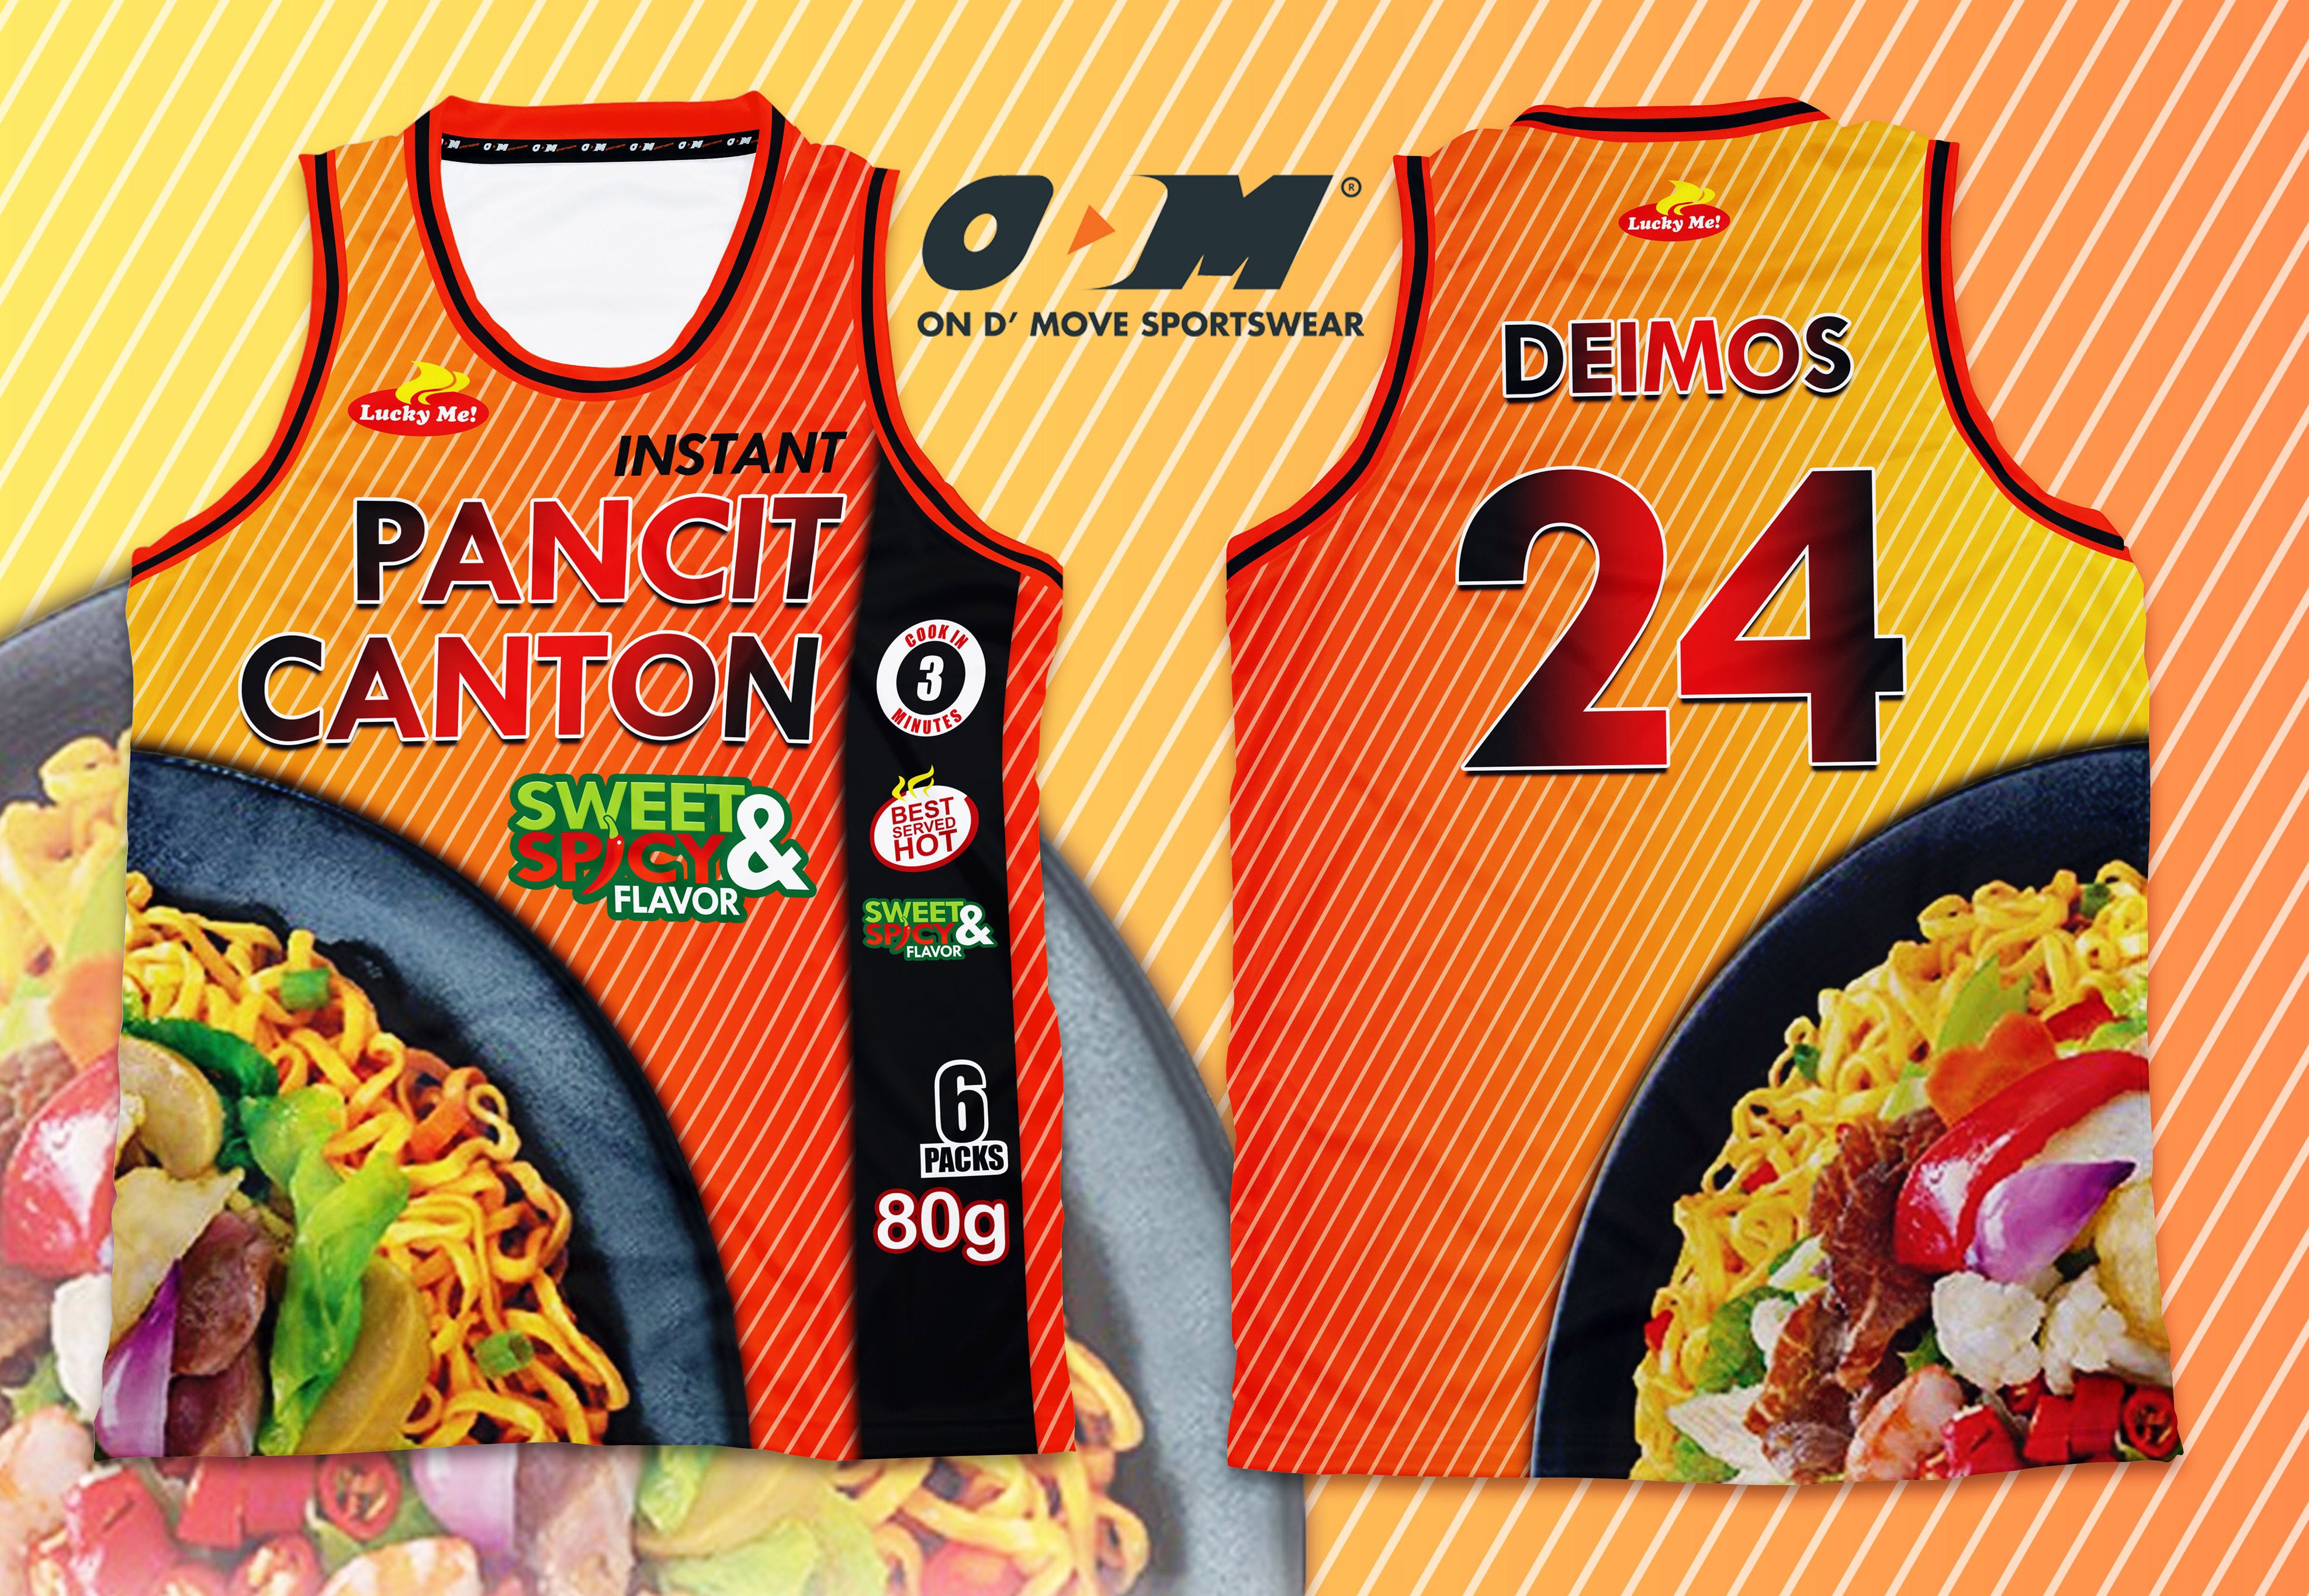 Pancit Canton Sweet & Spicy Jersey